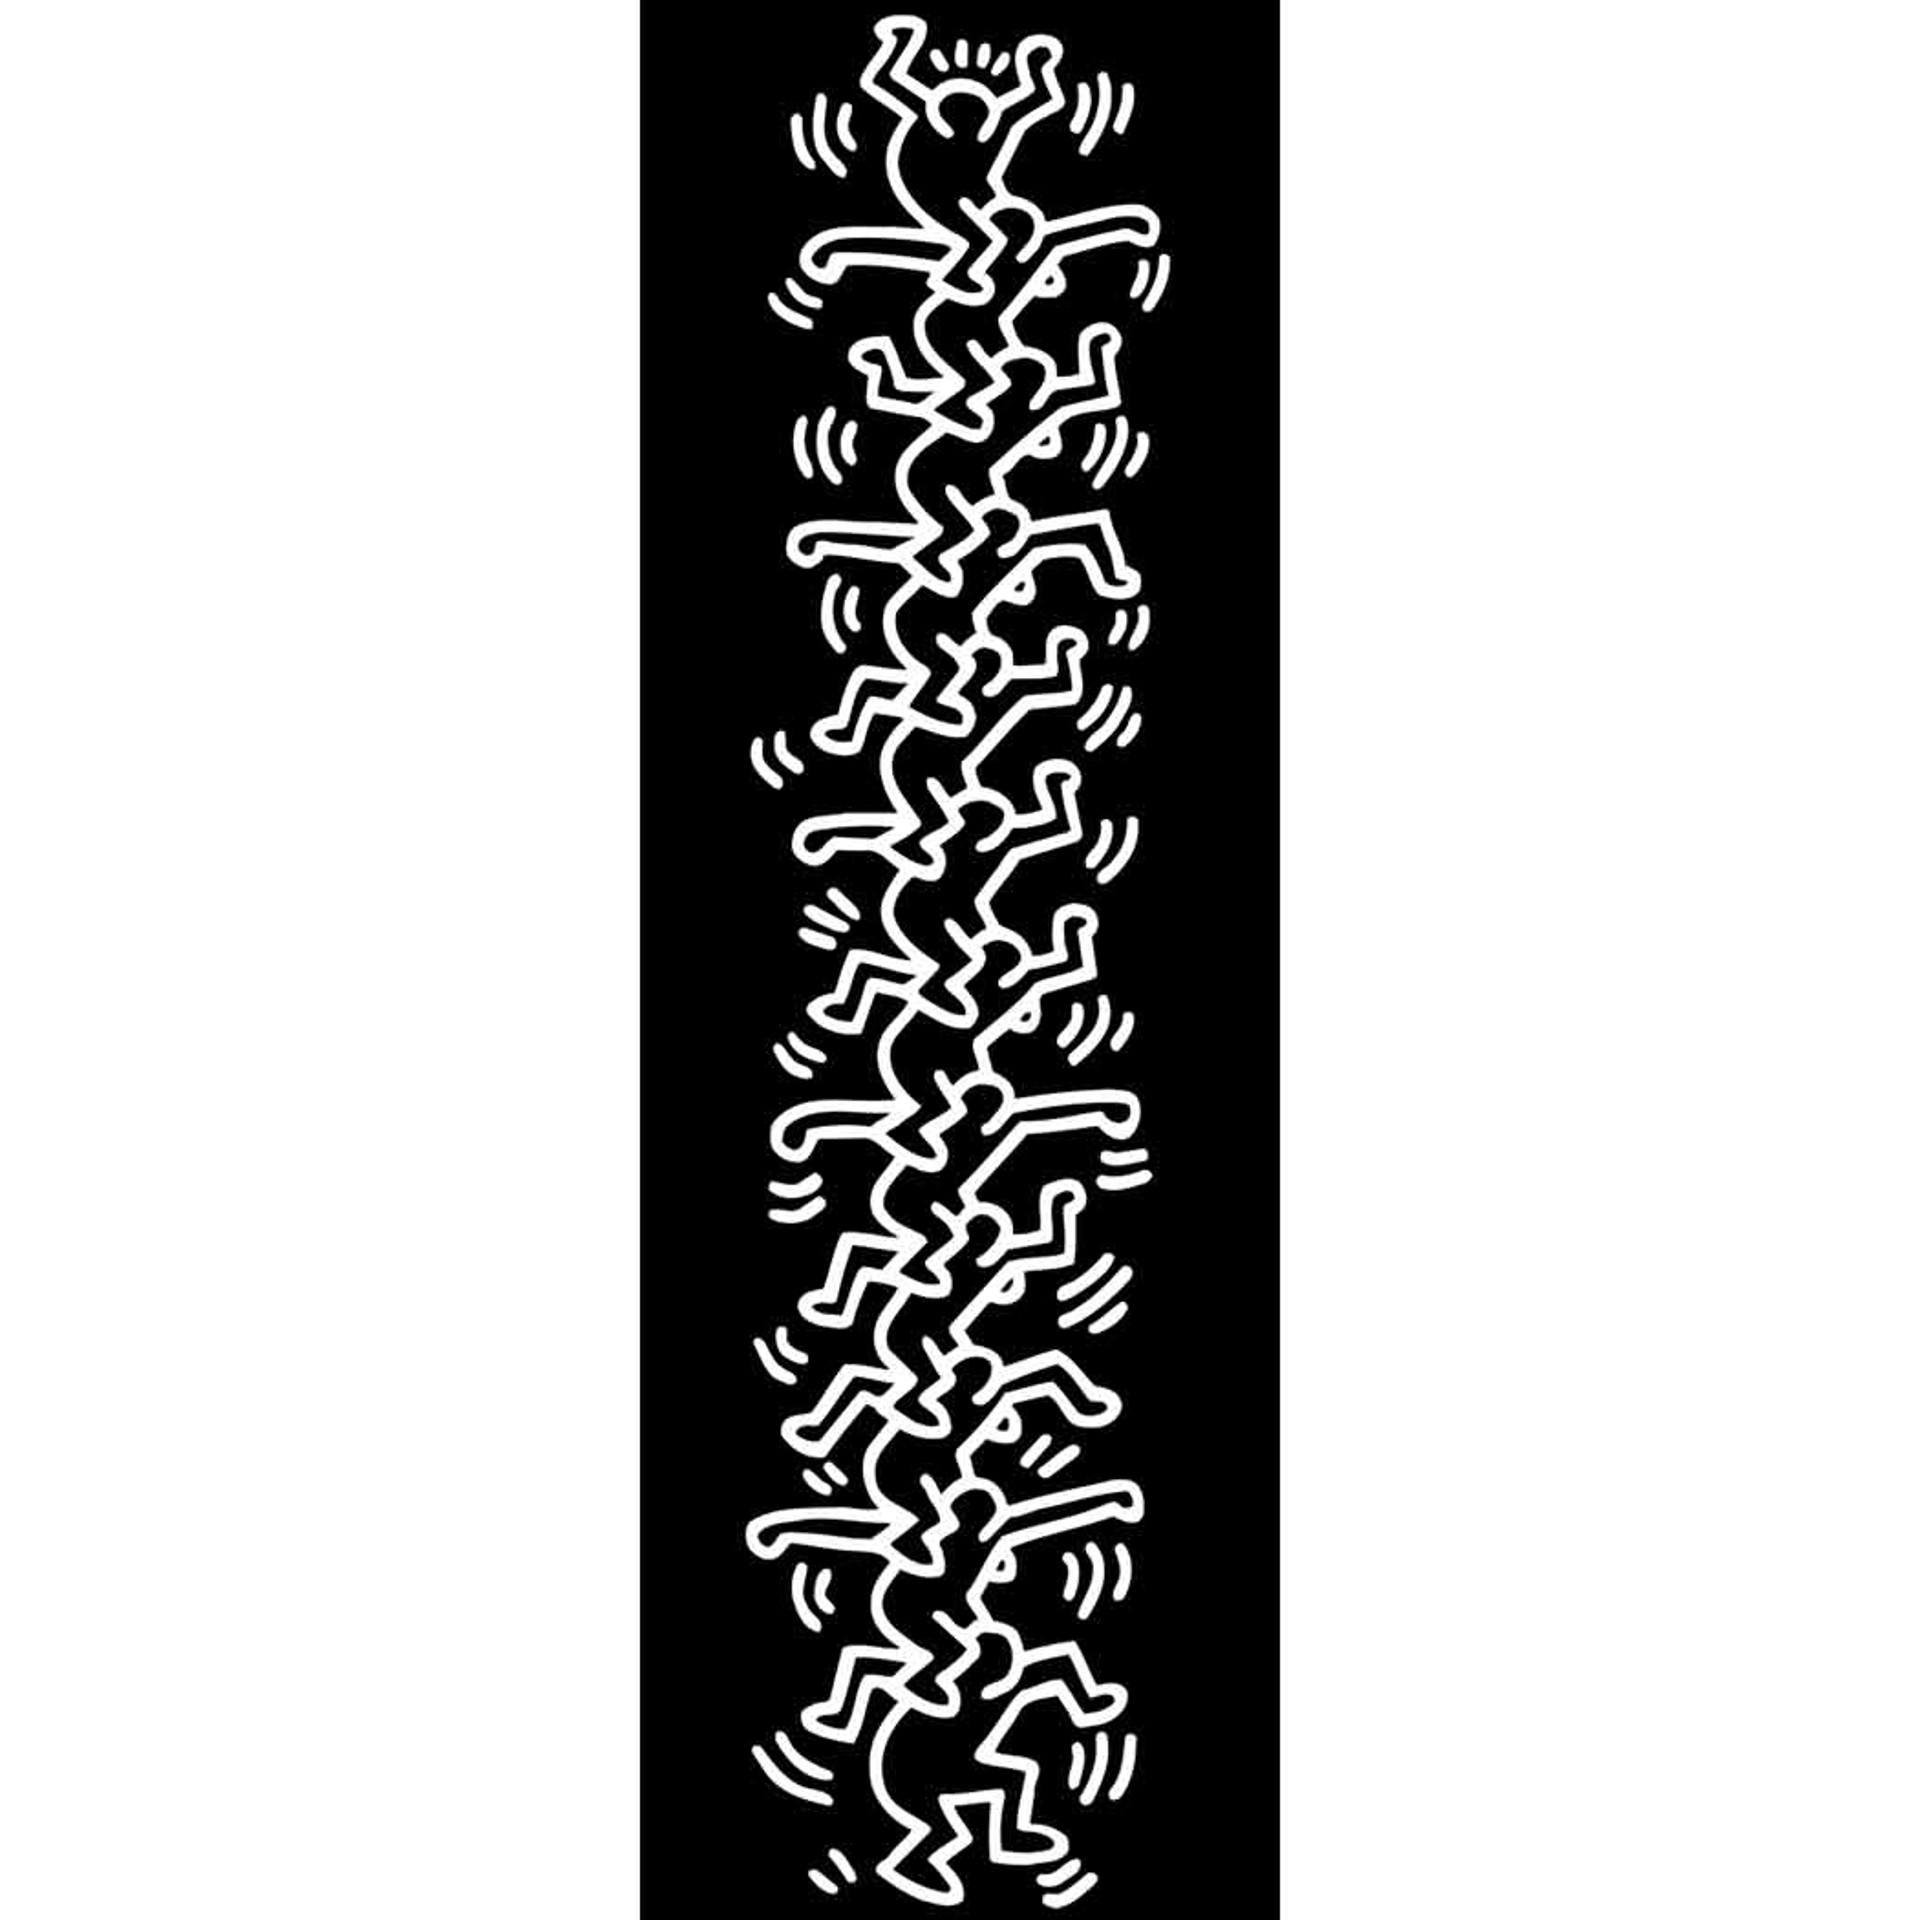 Stacked Figures 4.5x1.5 Magnet by Keith Haring